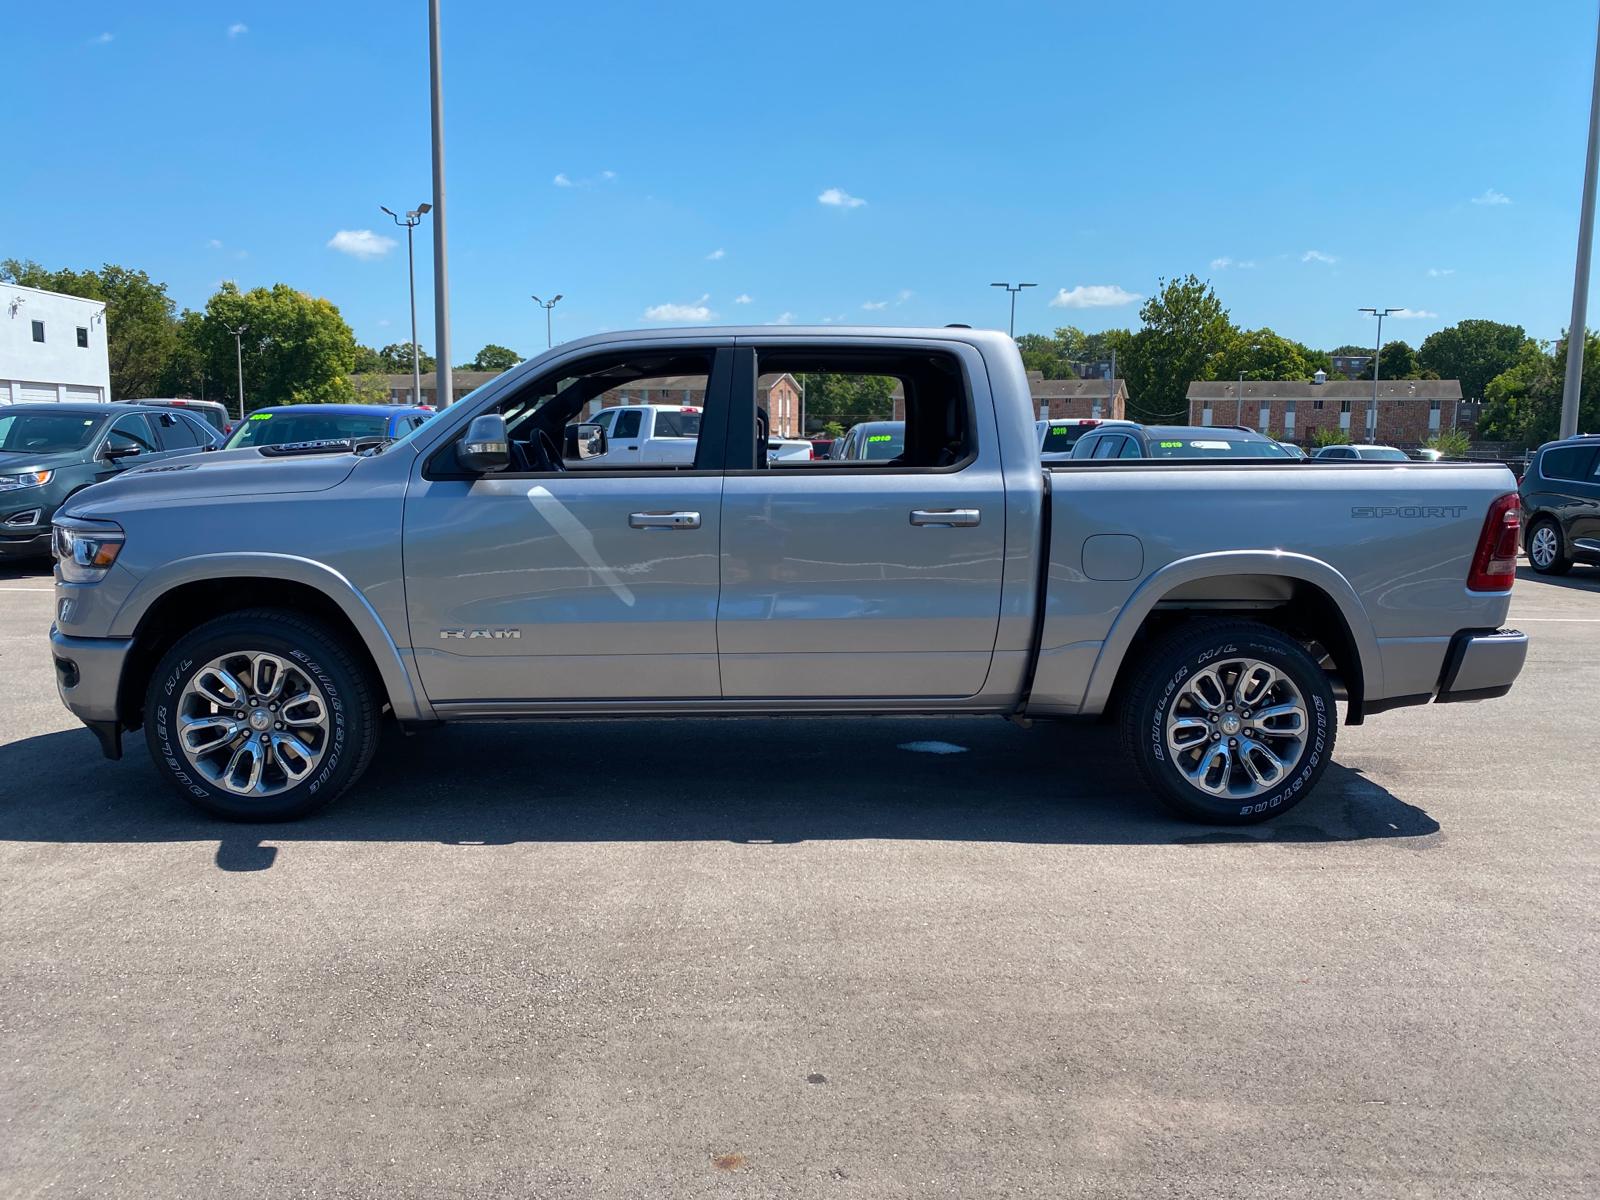 2020 ram 1500 with rambox for sale